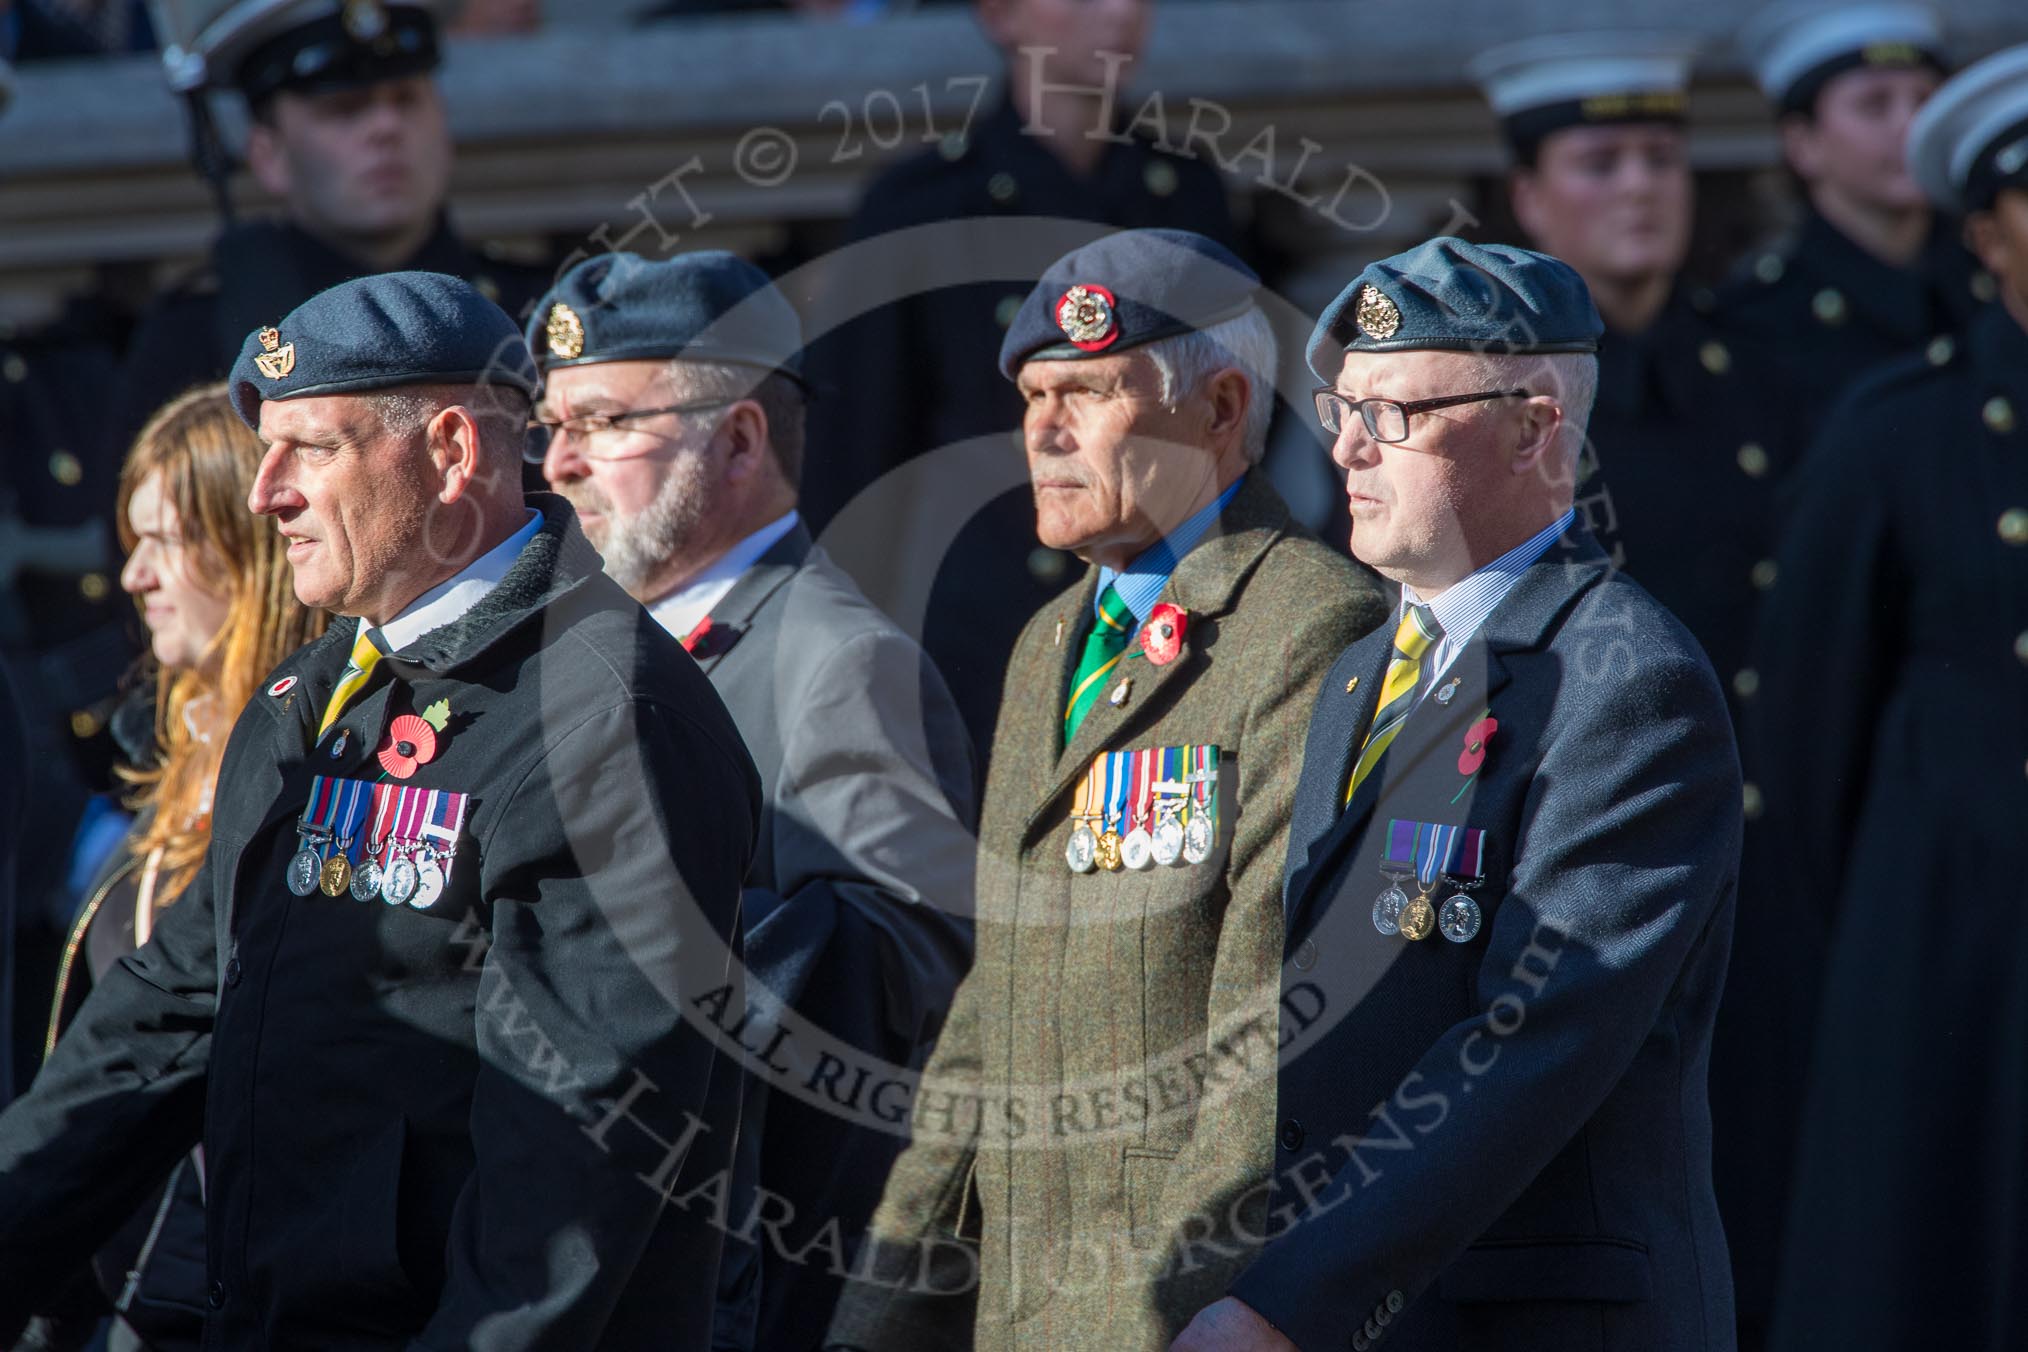 Royal Air Force Survival Equipment (squippers) Association (Group C23, 50 members) during the Royal British Legion March Past on Remembrance Sunday at the Cenotaph, Whitehall, Westminster, London, 11 November 2018, 12:18.